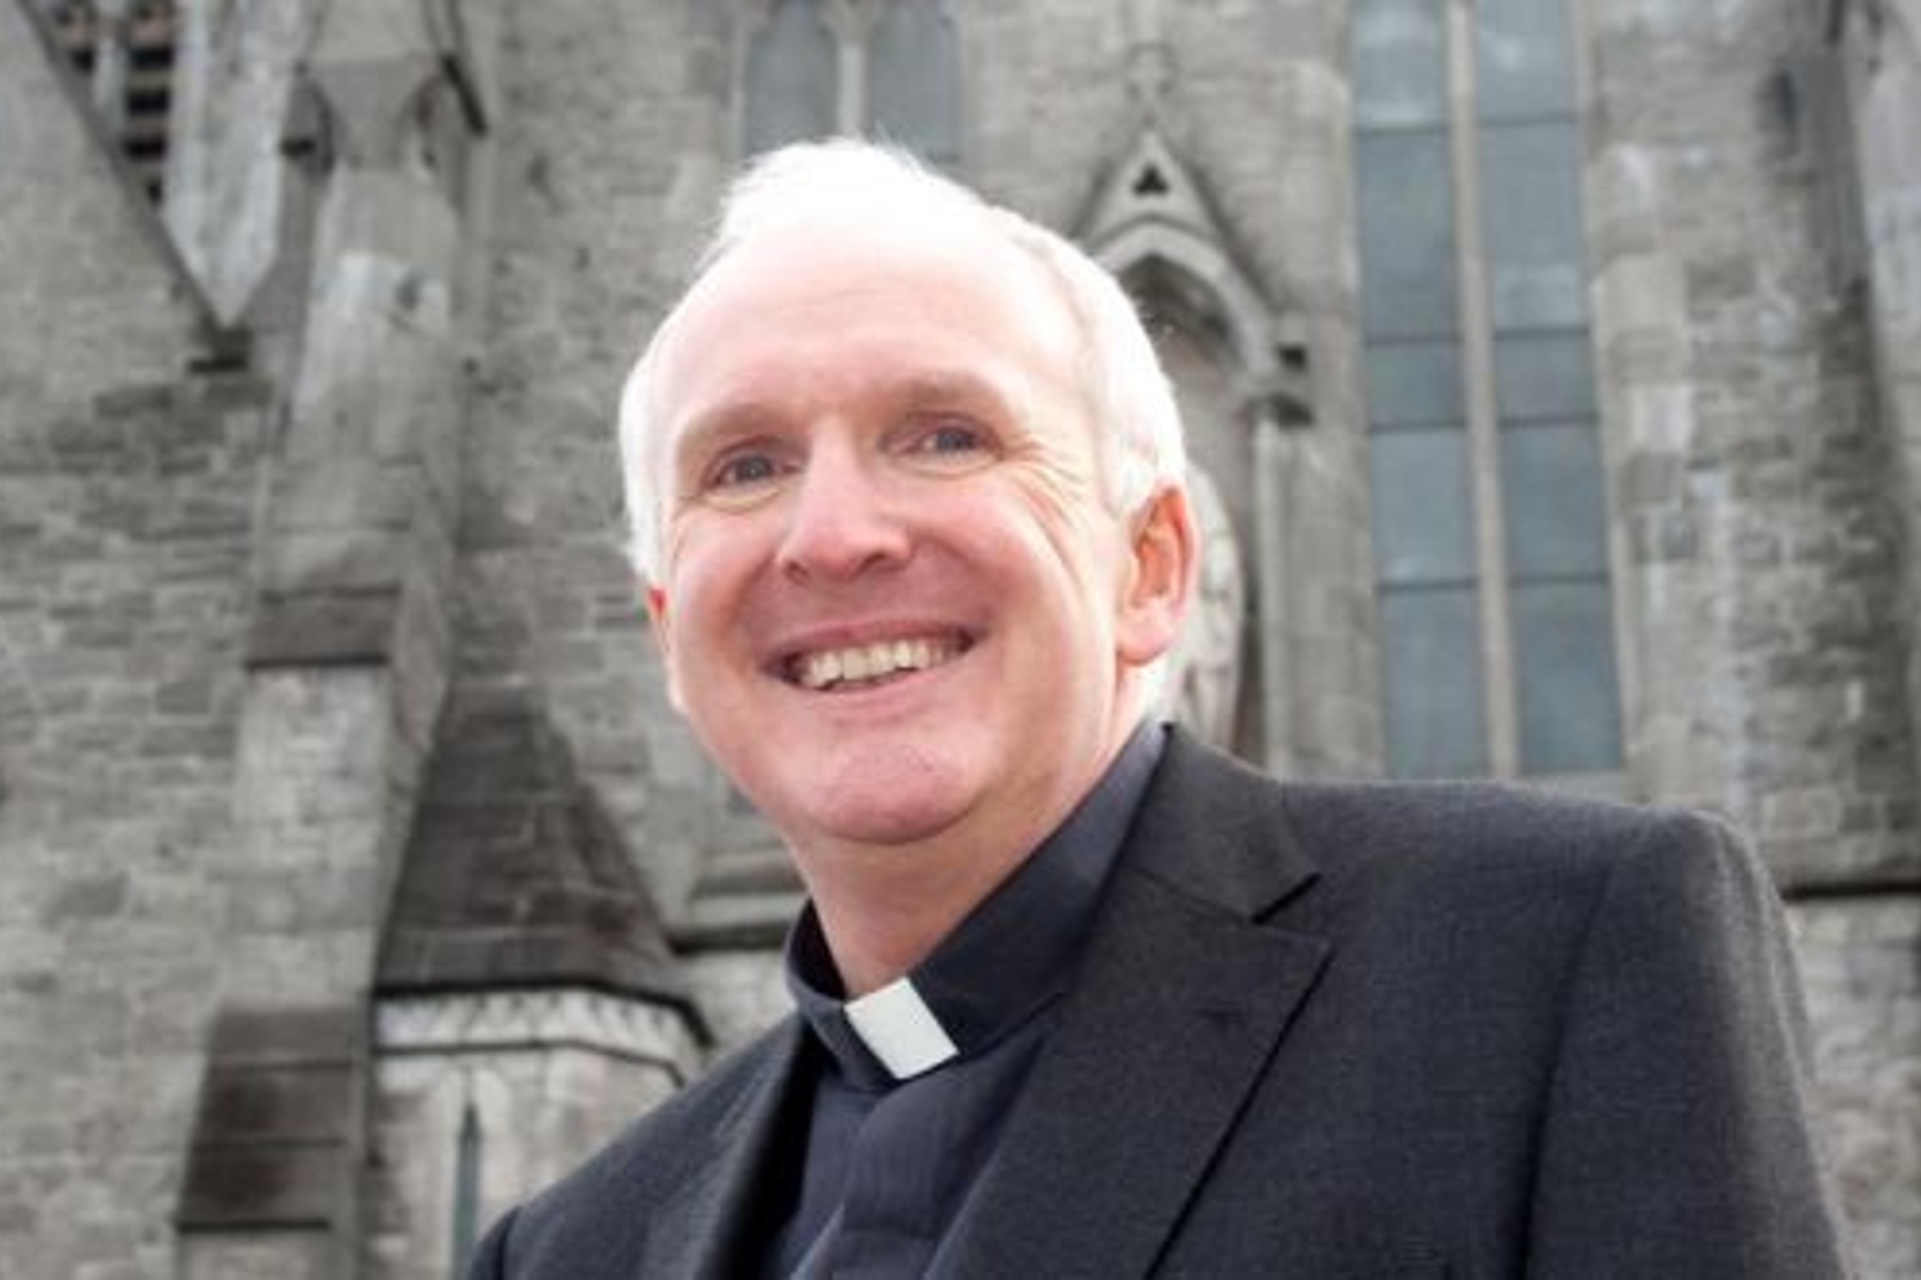 Remember those suffering under the radar – Bishop Leahy's Palm Sunday message